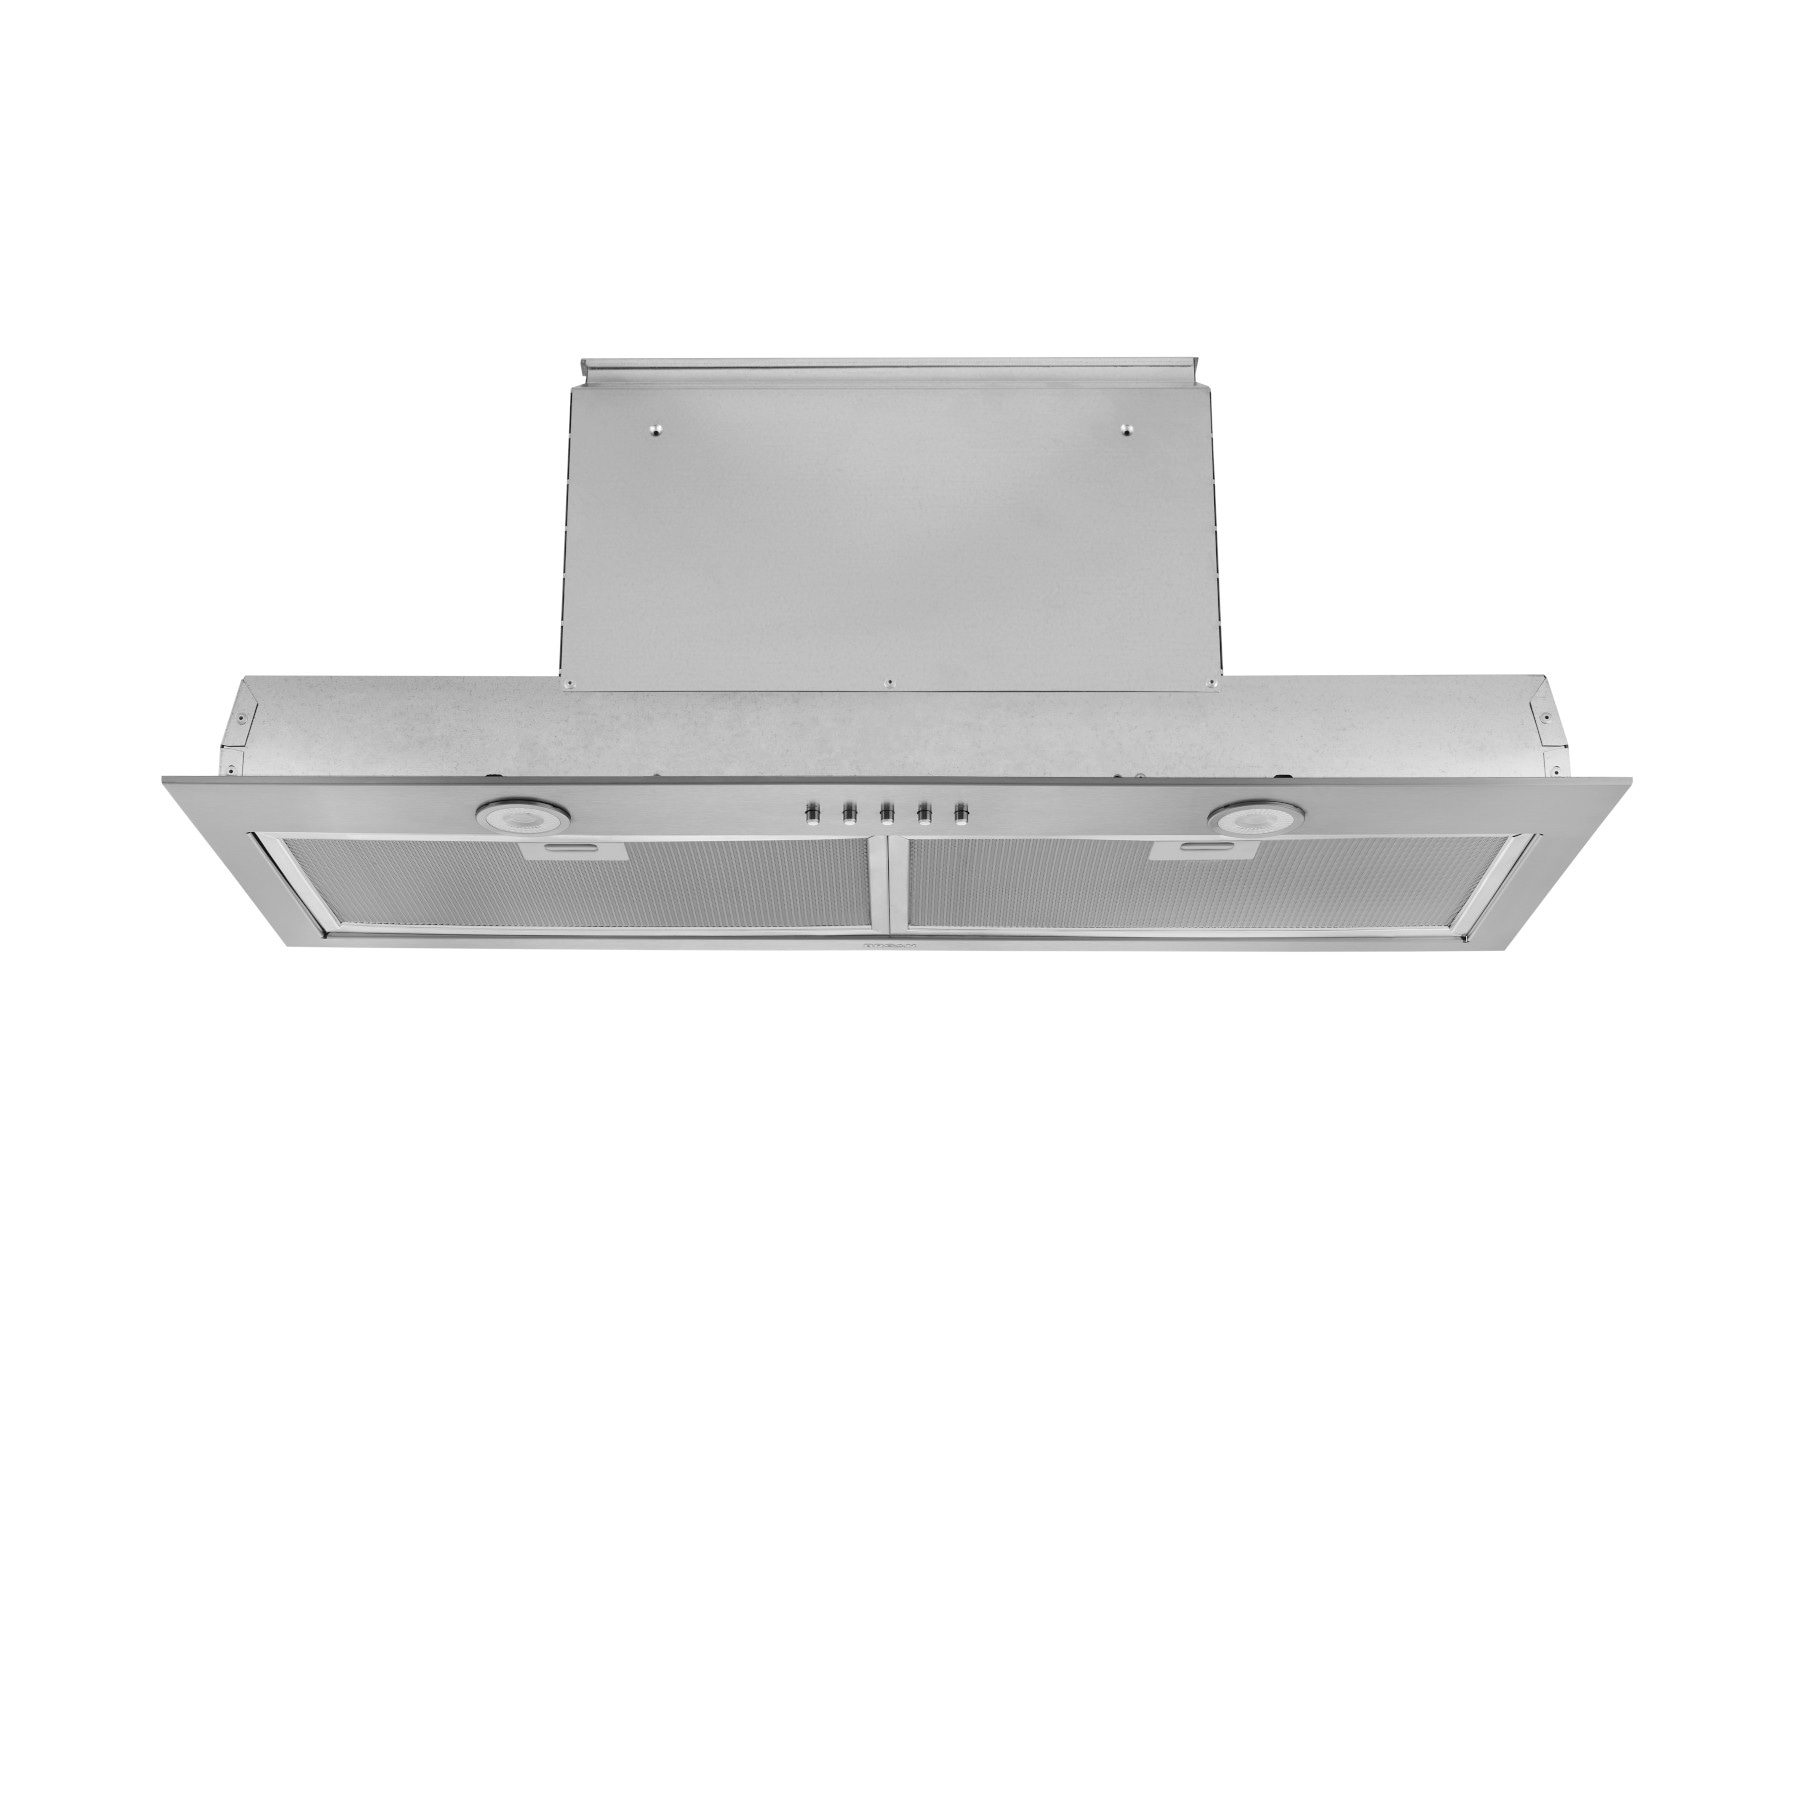 Broan® 24-Inch Ductless Under-Cabinet Range Hood, Stainless Steel